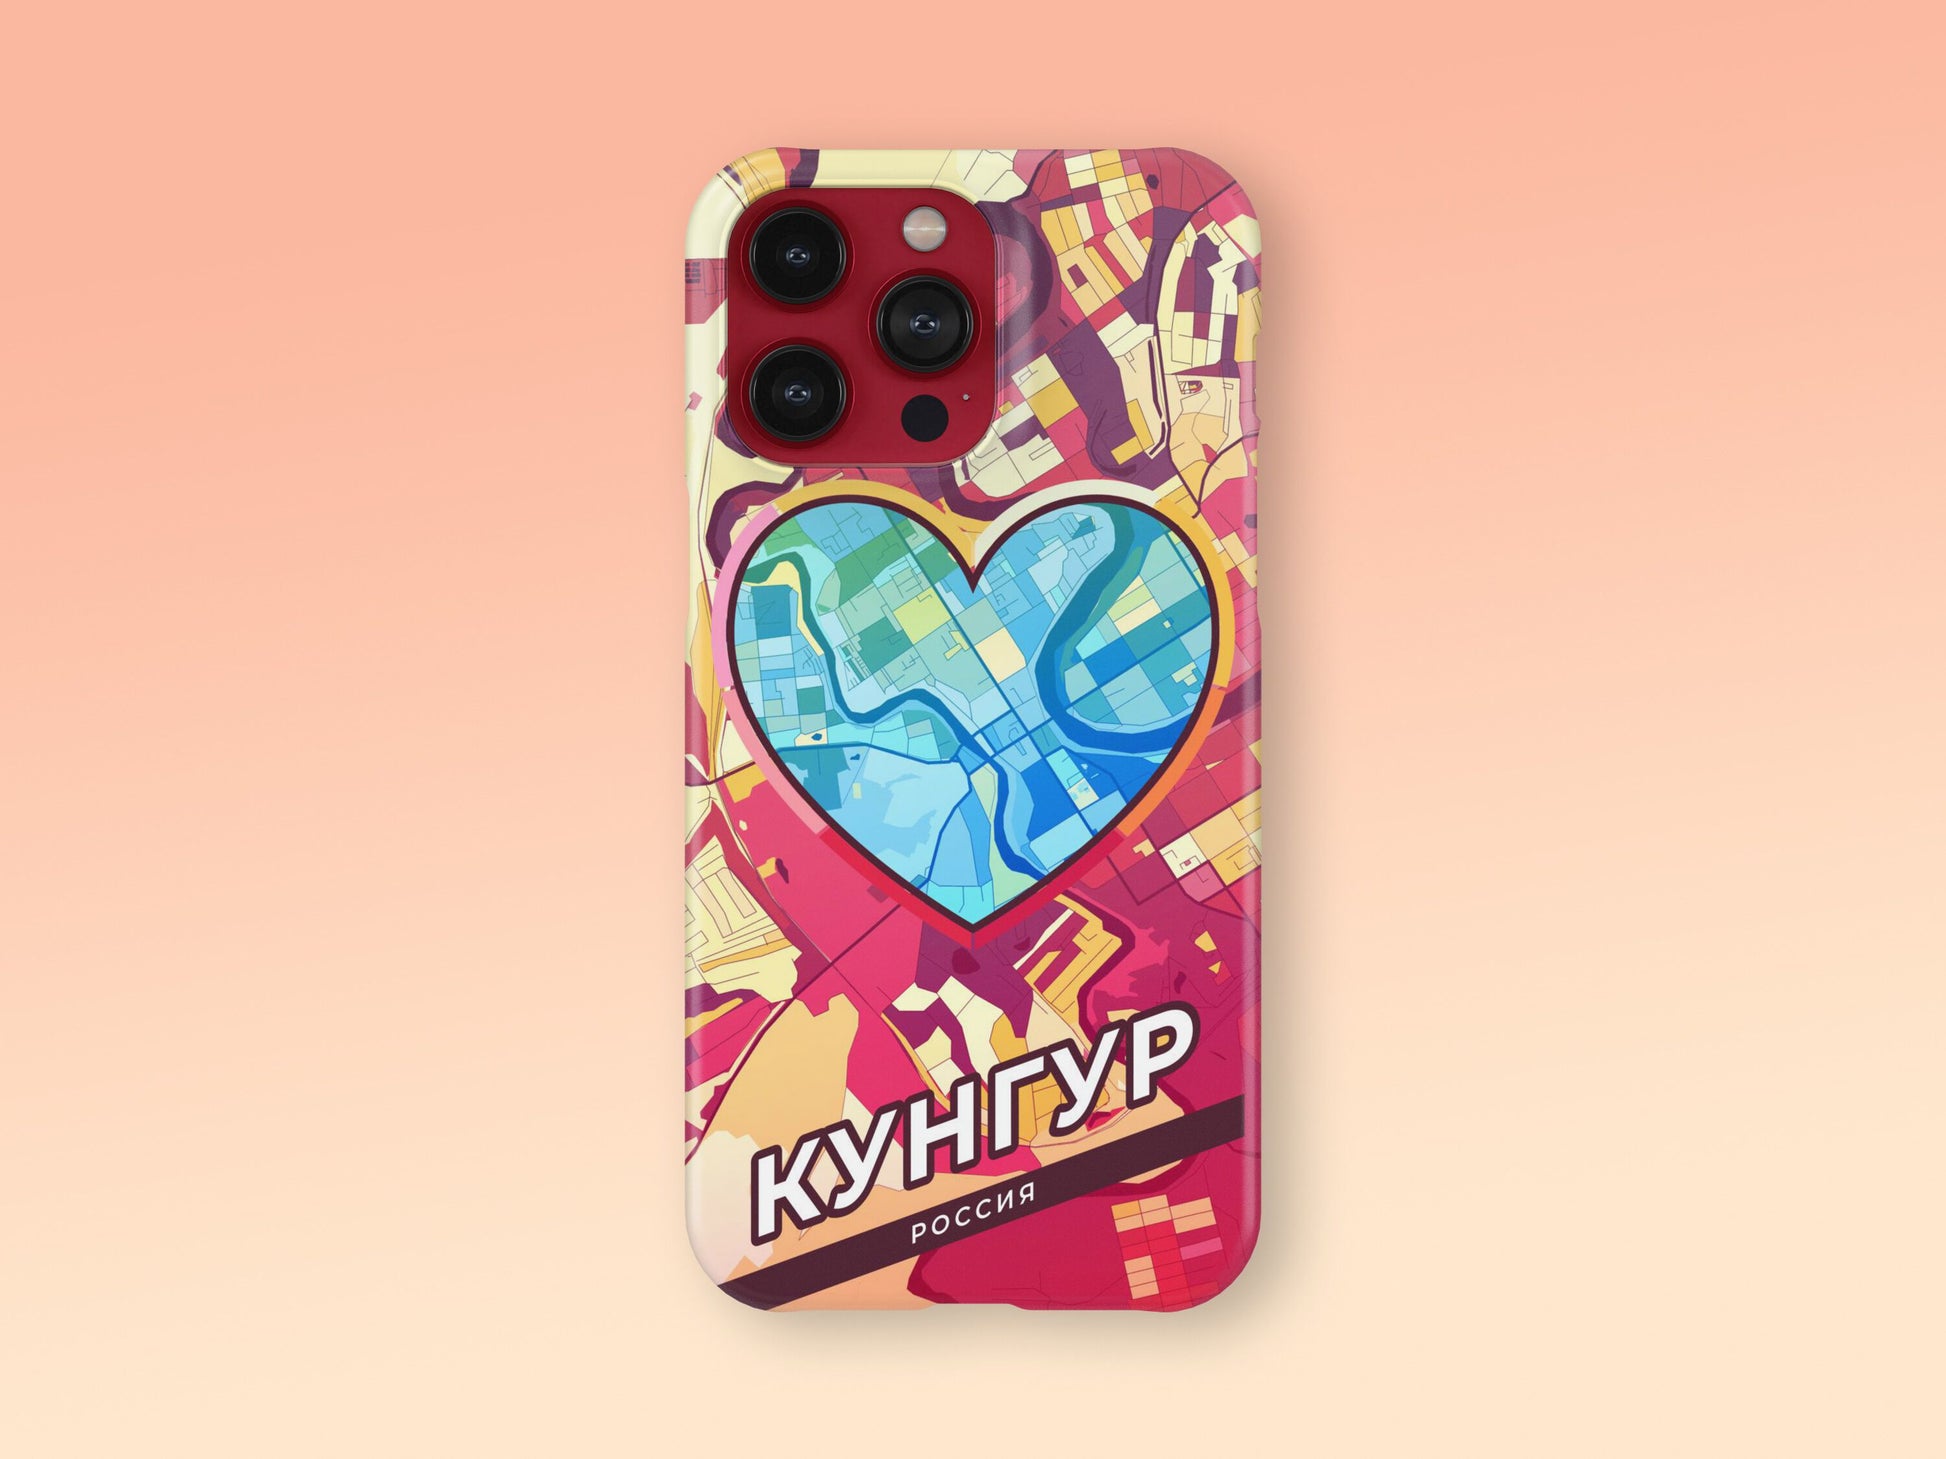 Kungur Russia slim phone case with colorful icon. Birthday, wedding or housewarming gift. Couple match cases. 2